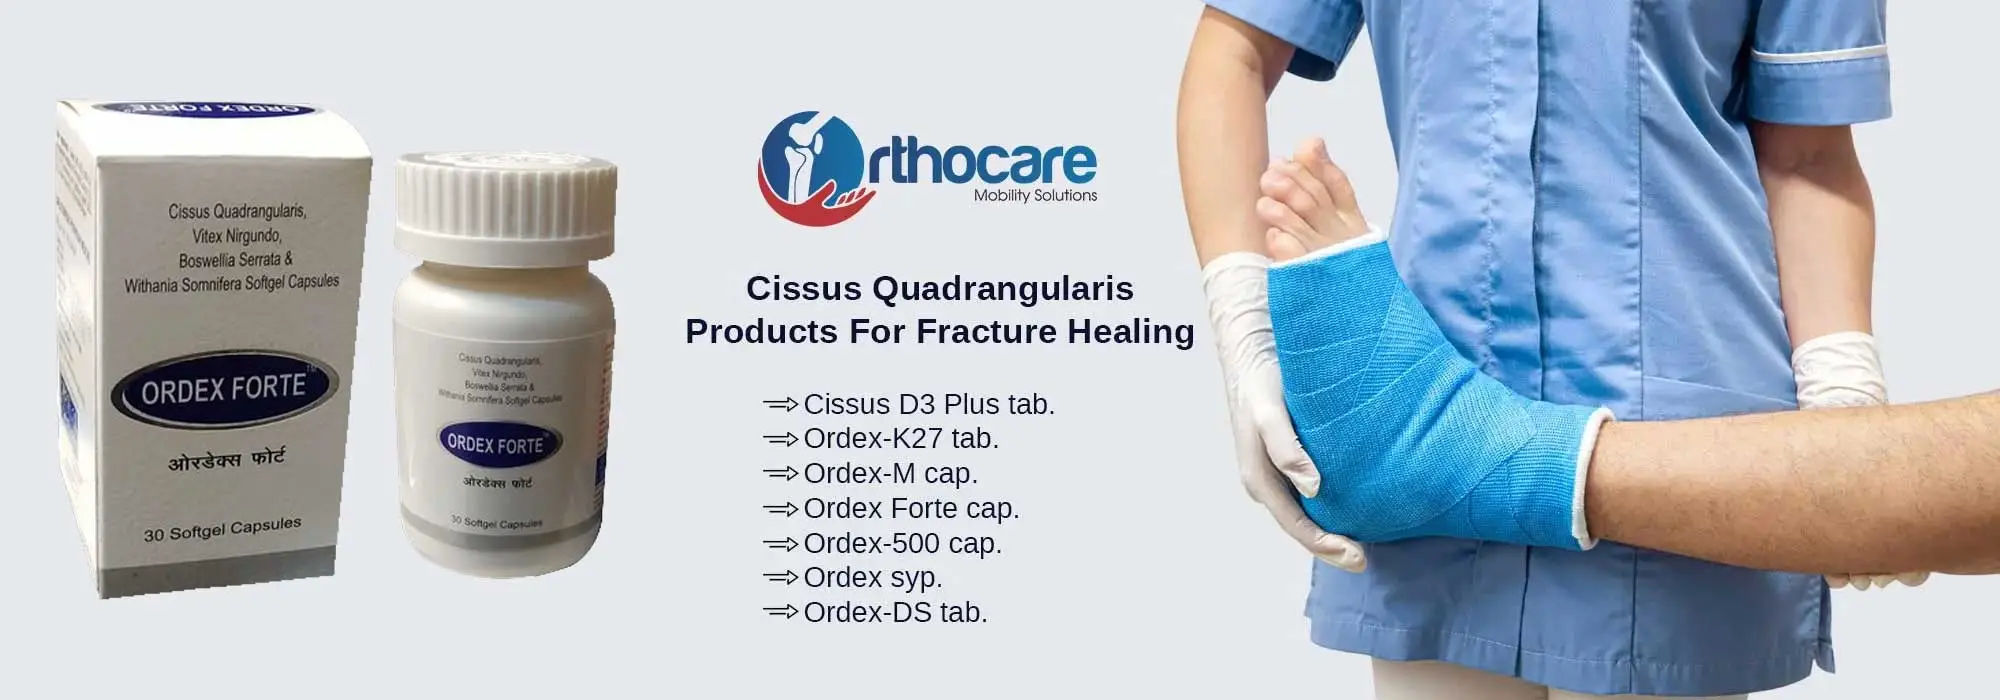 Cissus Quadrangularis Products For Fracture Healing Suppliers in Saharanpur